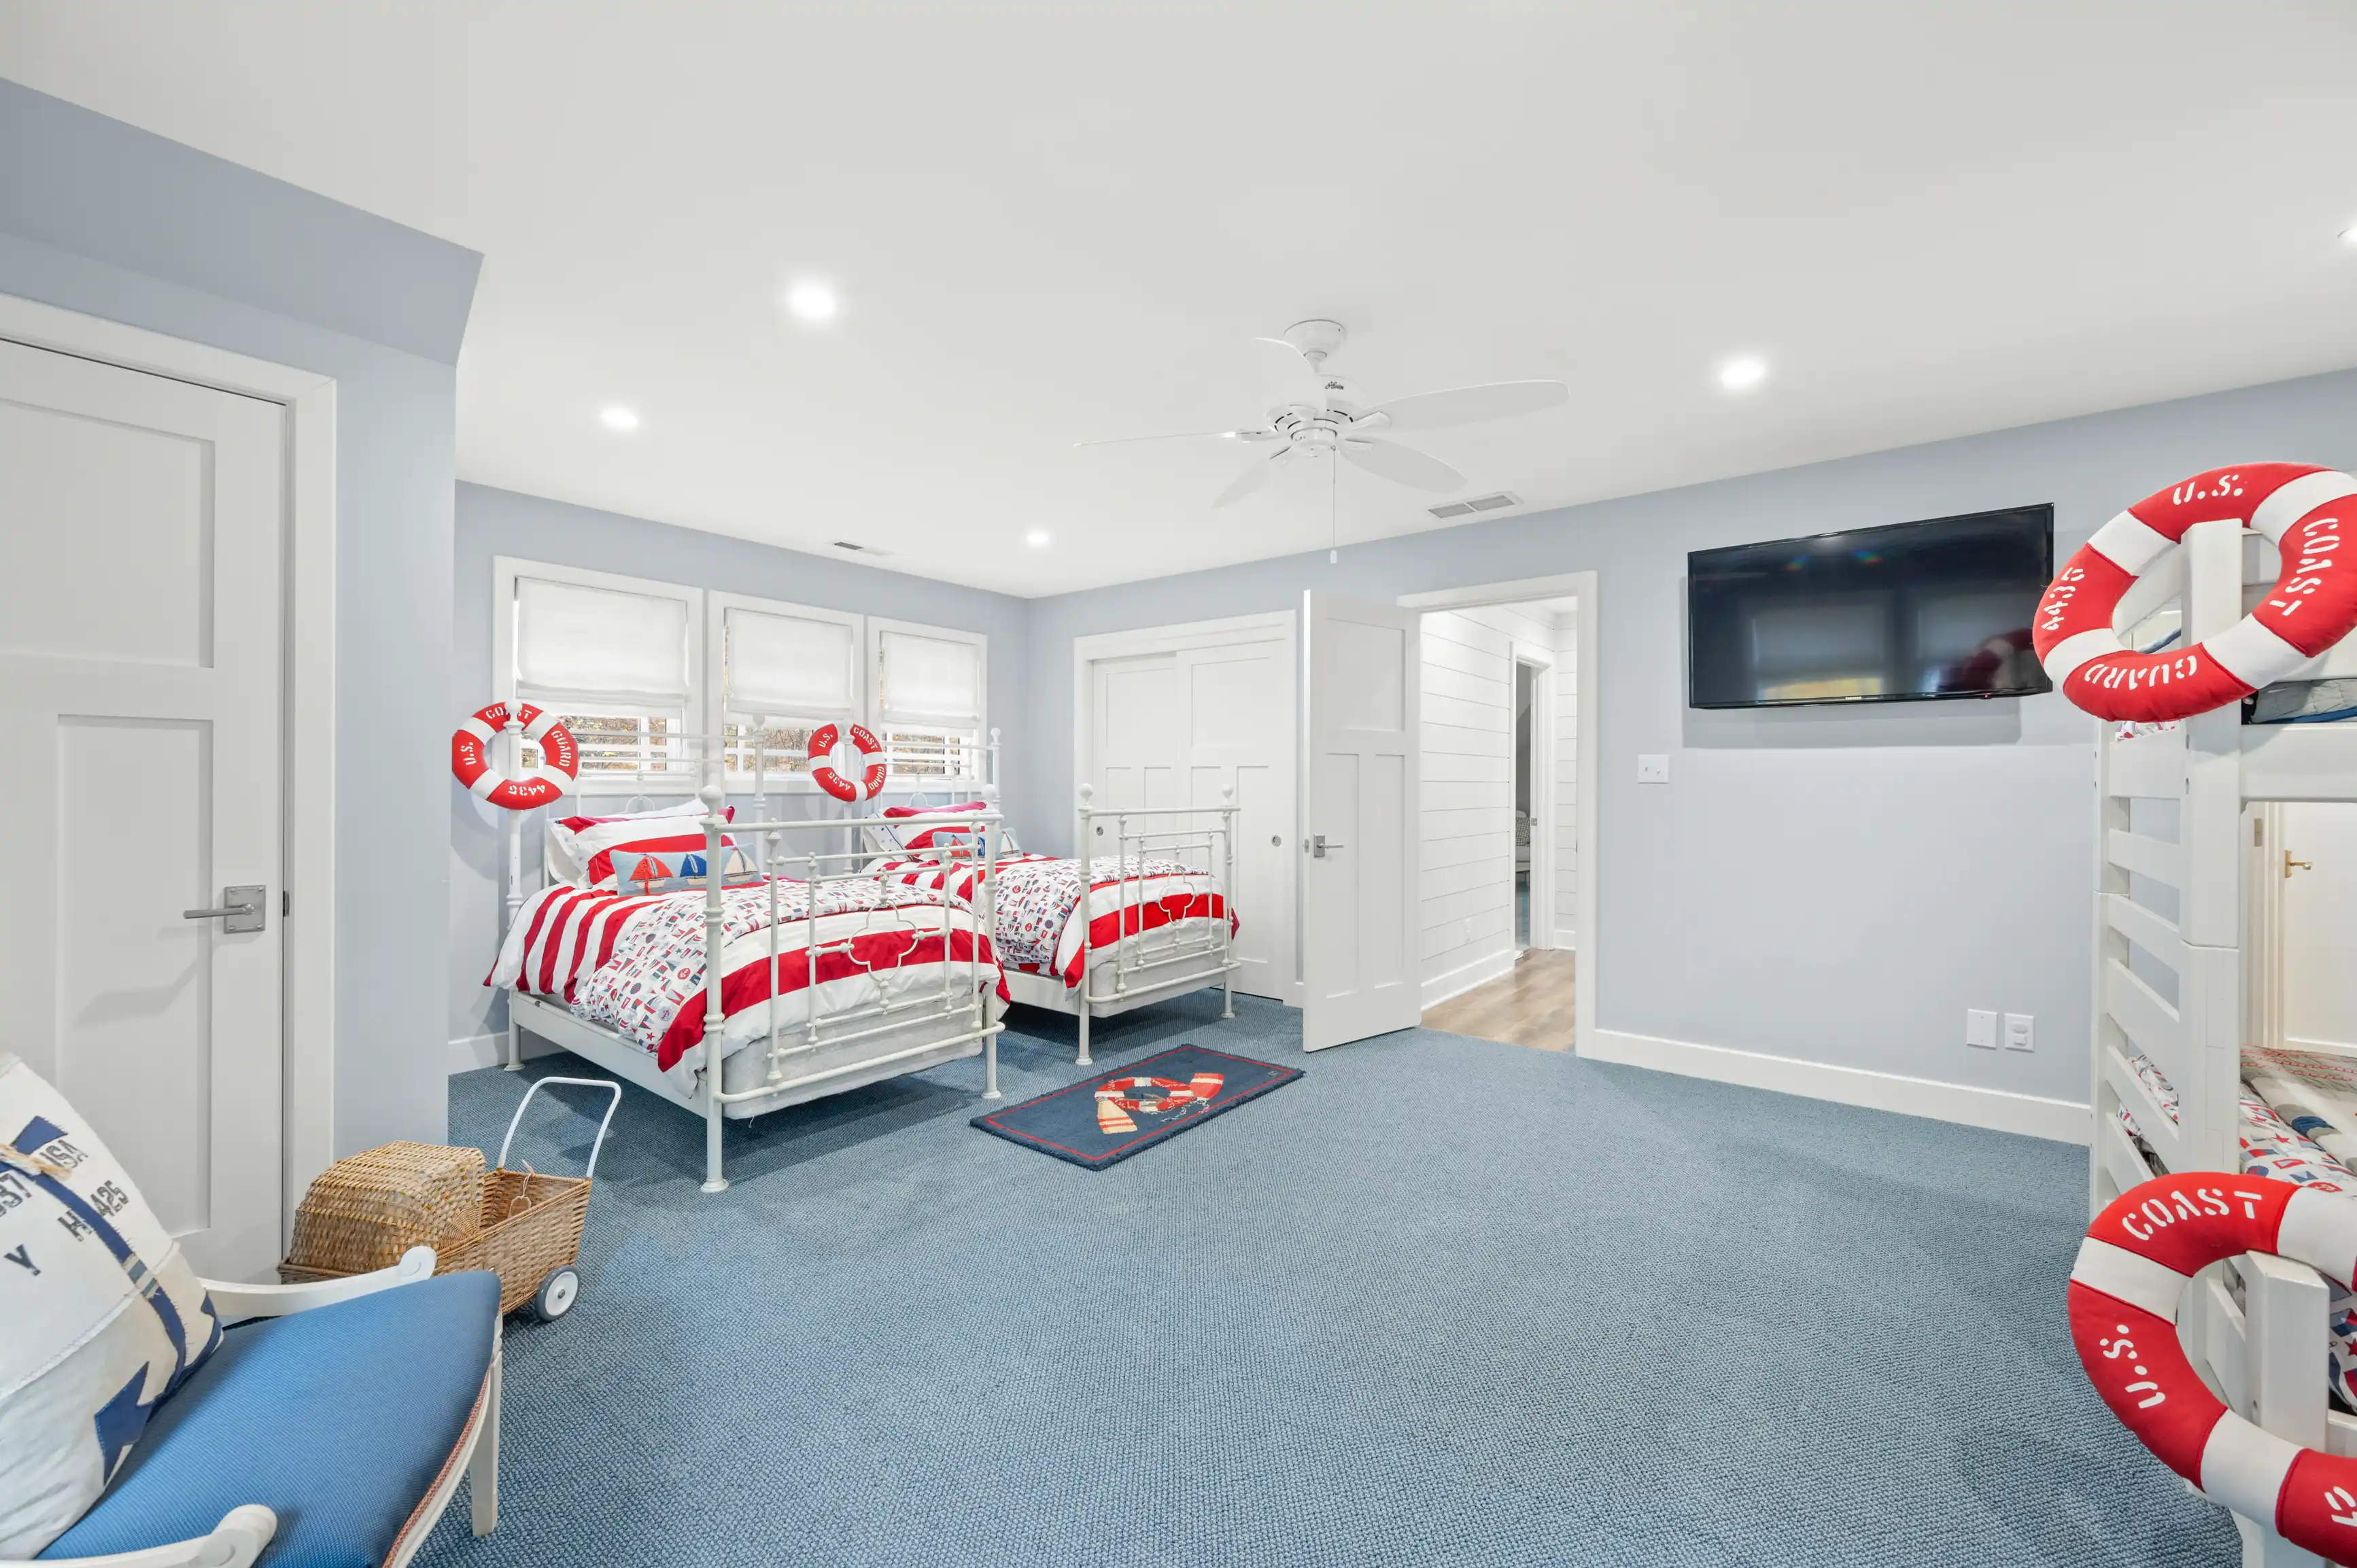 Spacious, nautical-themed bedroom with two twin beds featuring red and white linens, lifebuoy decorations on walls, blue carpet, ceiling fan, flat-screen TV, and a large window letting in natural light.